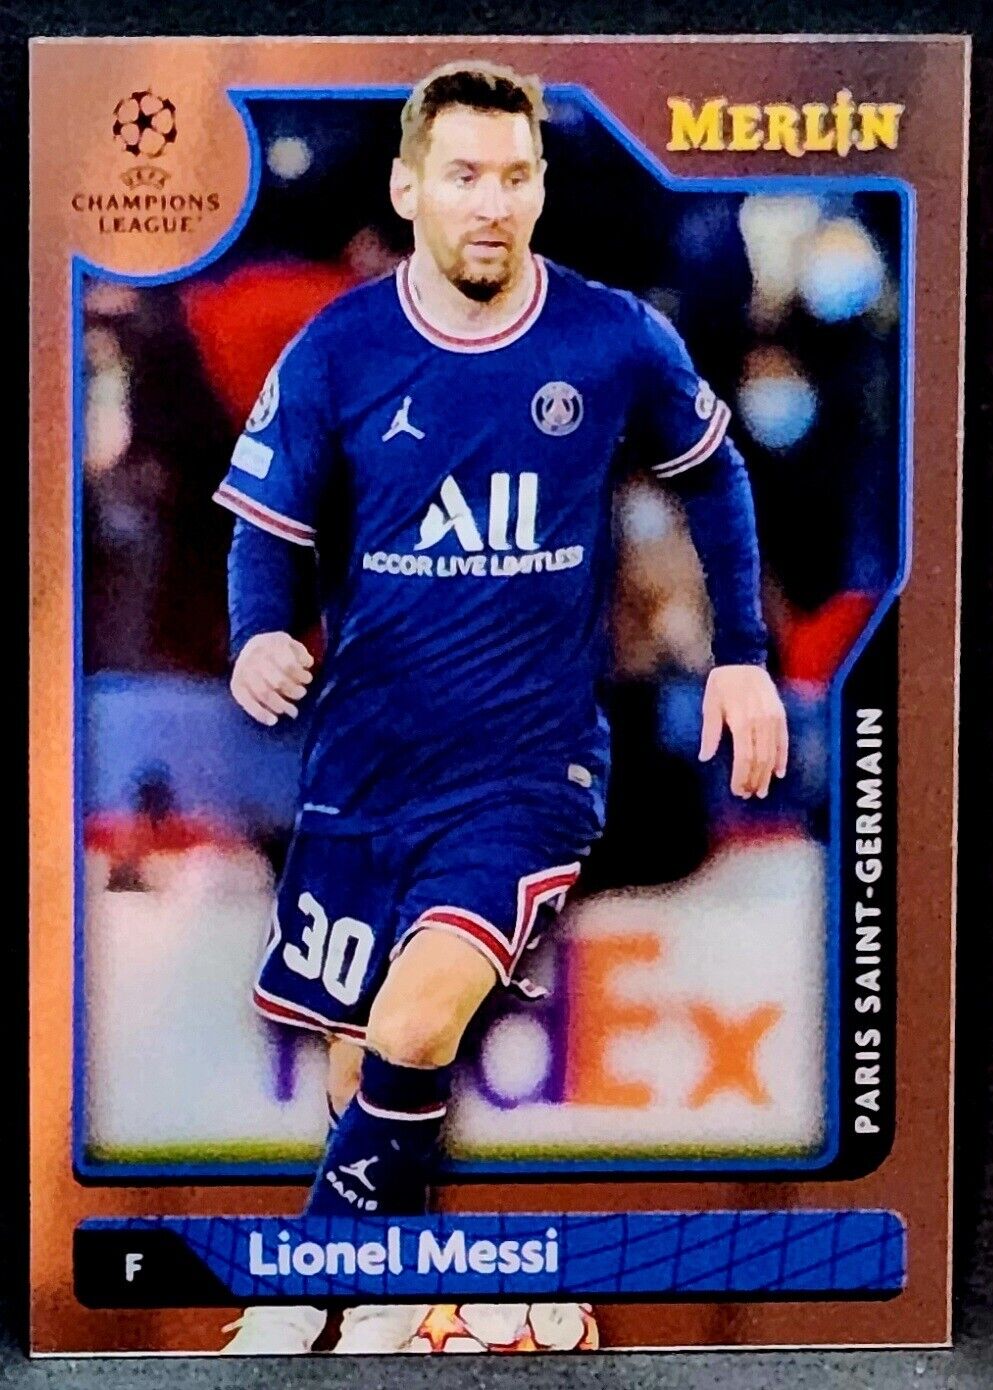 Lionel Messi 2021-22 Topps Merlin Card #30 ARGENTINIA WORLD CUP MVP!